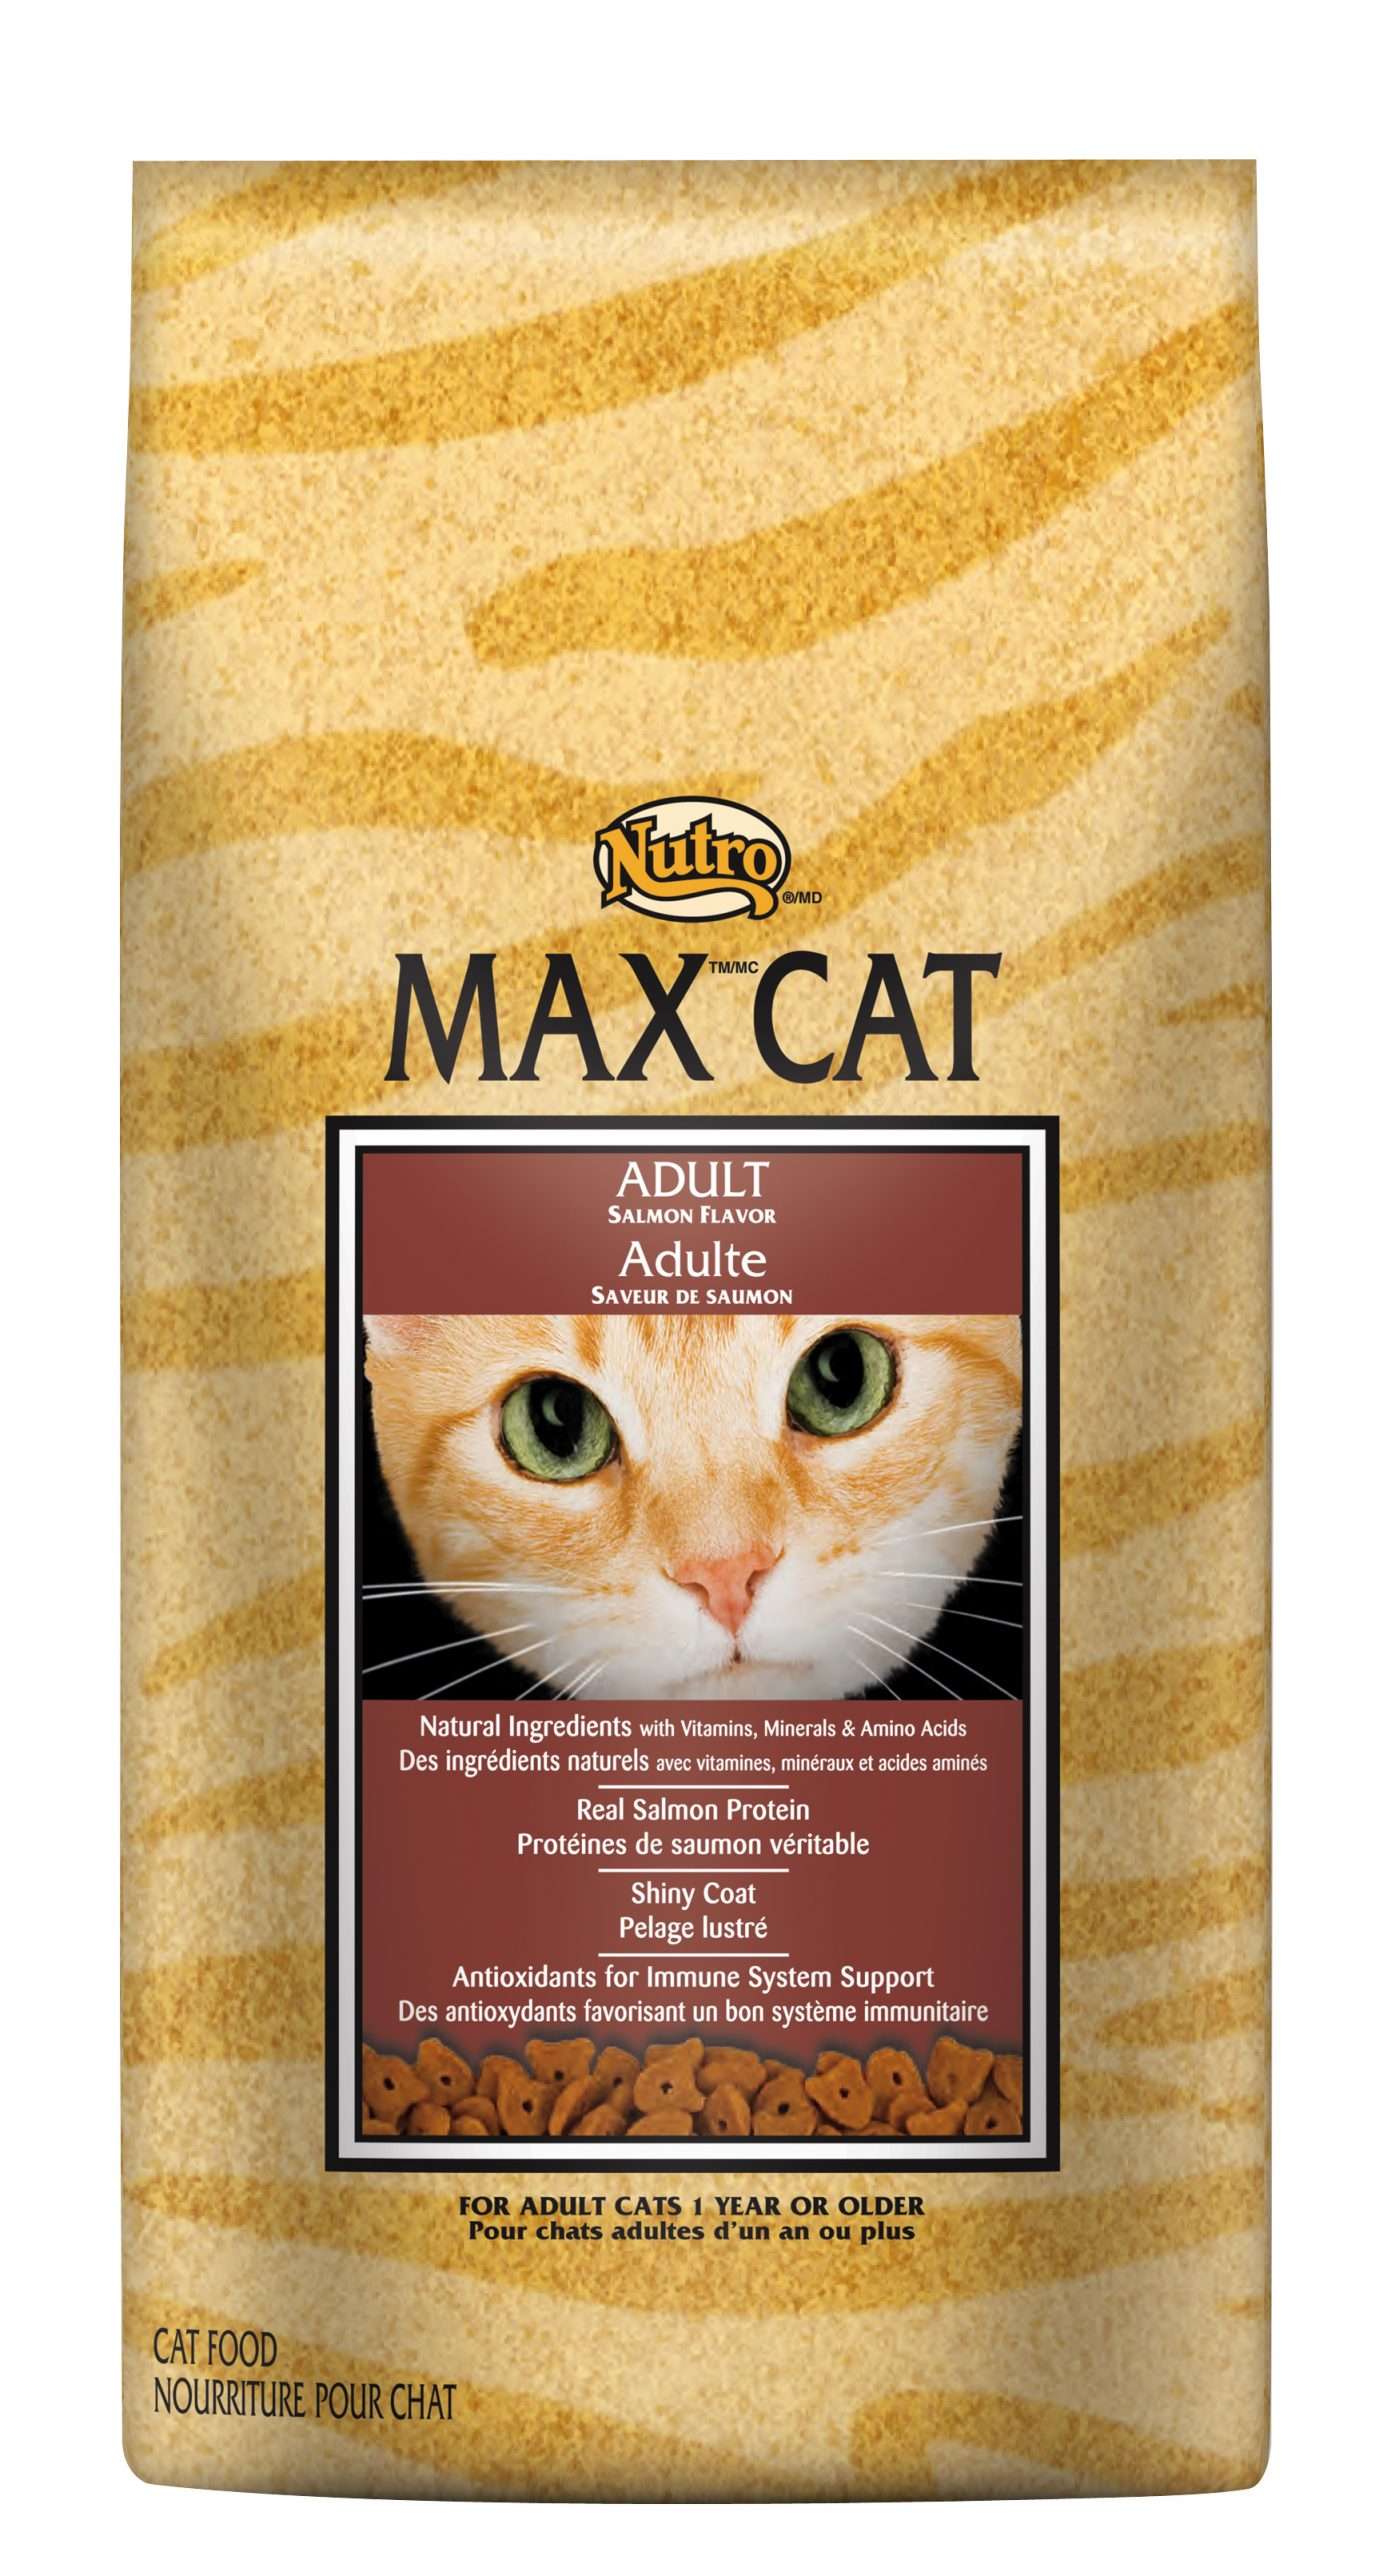 Nutro Max Cat Adult with Salmon Flavor Dry Cat Food, 16 lb ...